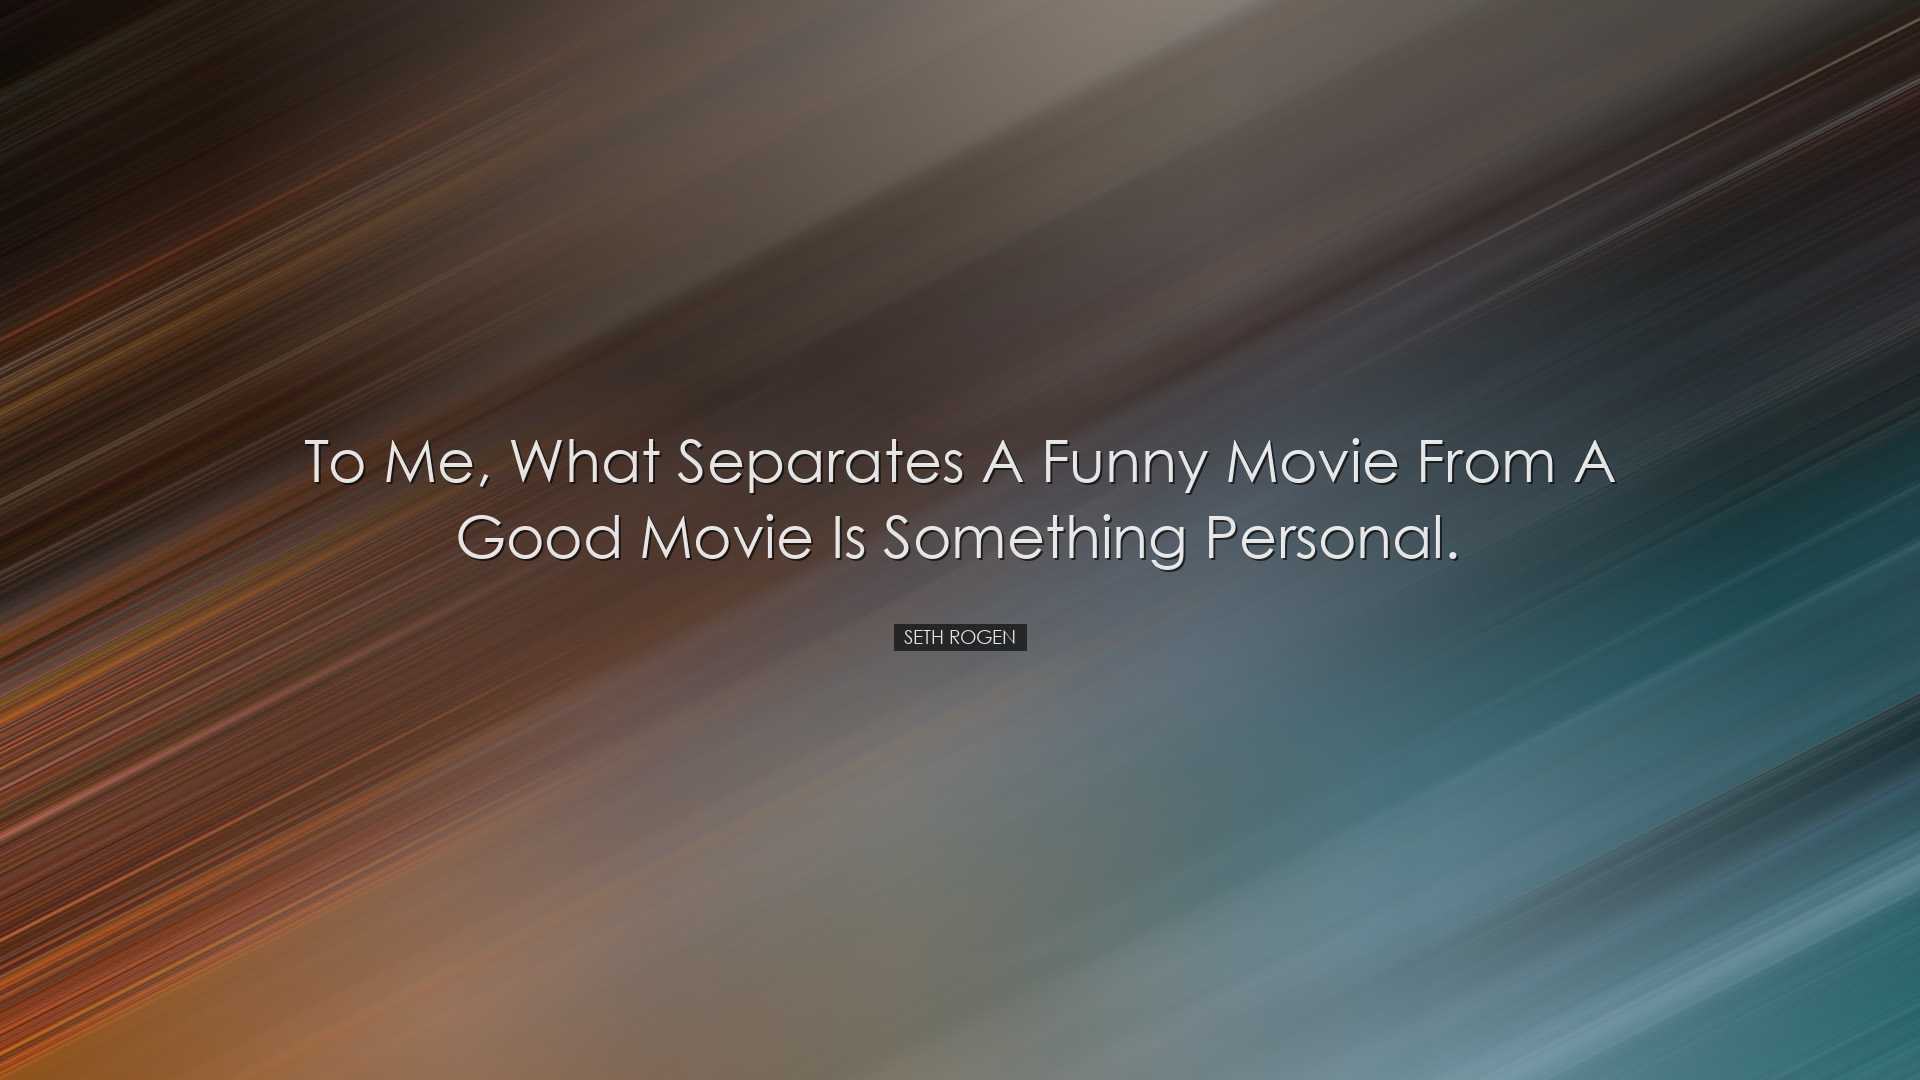 To me, what separates a funny movie from a good movie is something